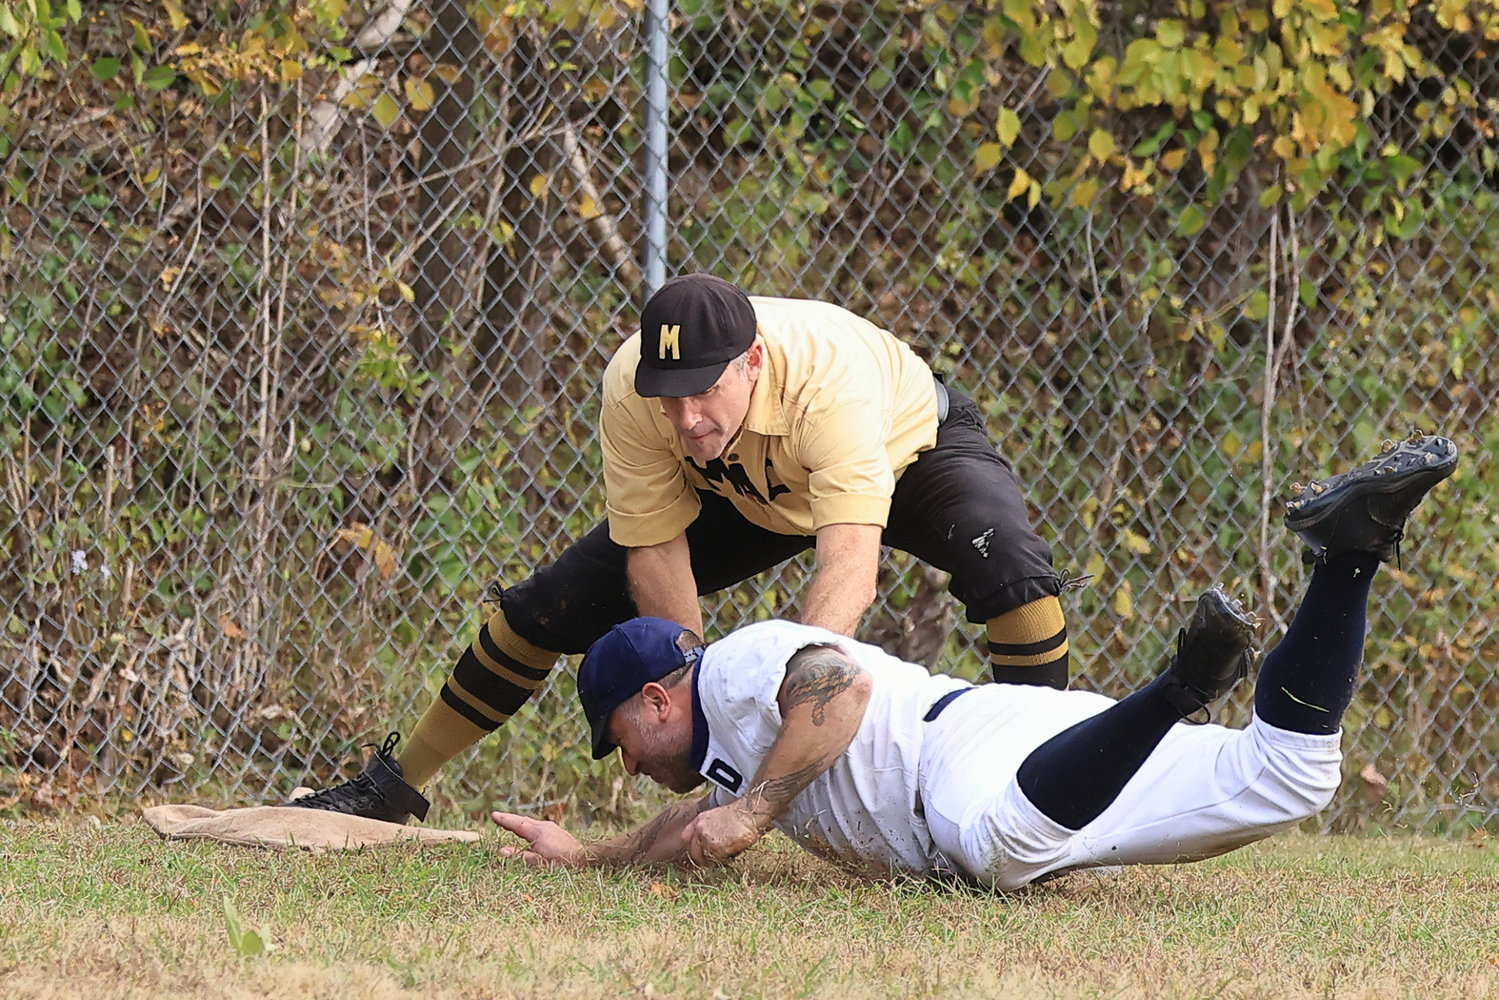 A Mountain Athletic Club third baseman puts the tag on the Delhi baserunner, as he slides into third base for an out.